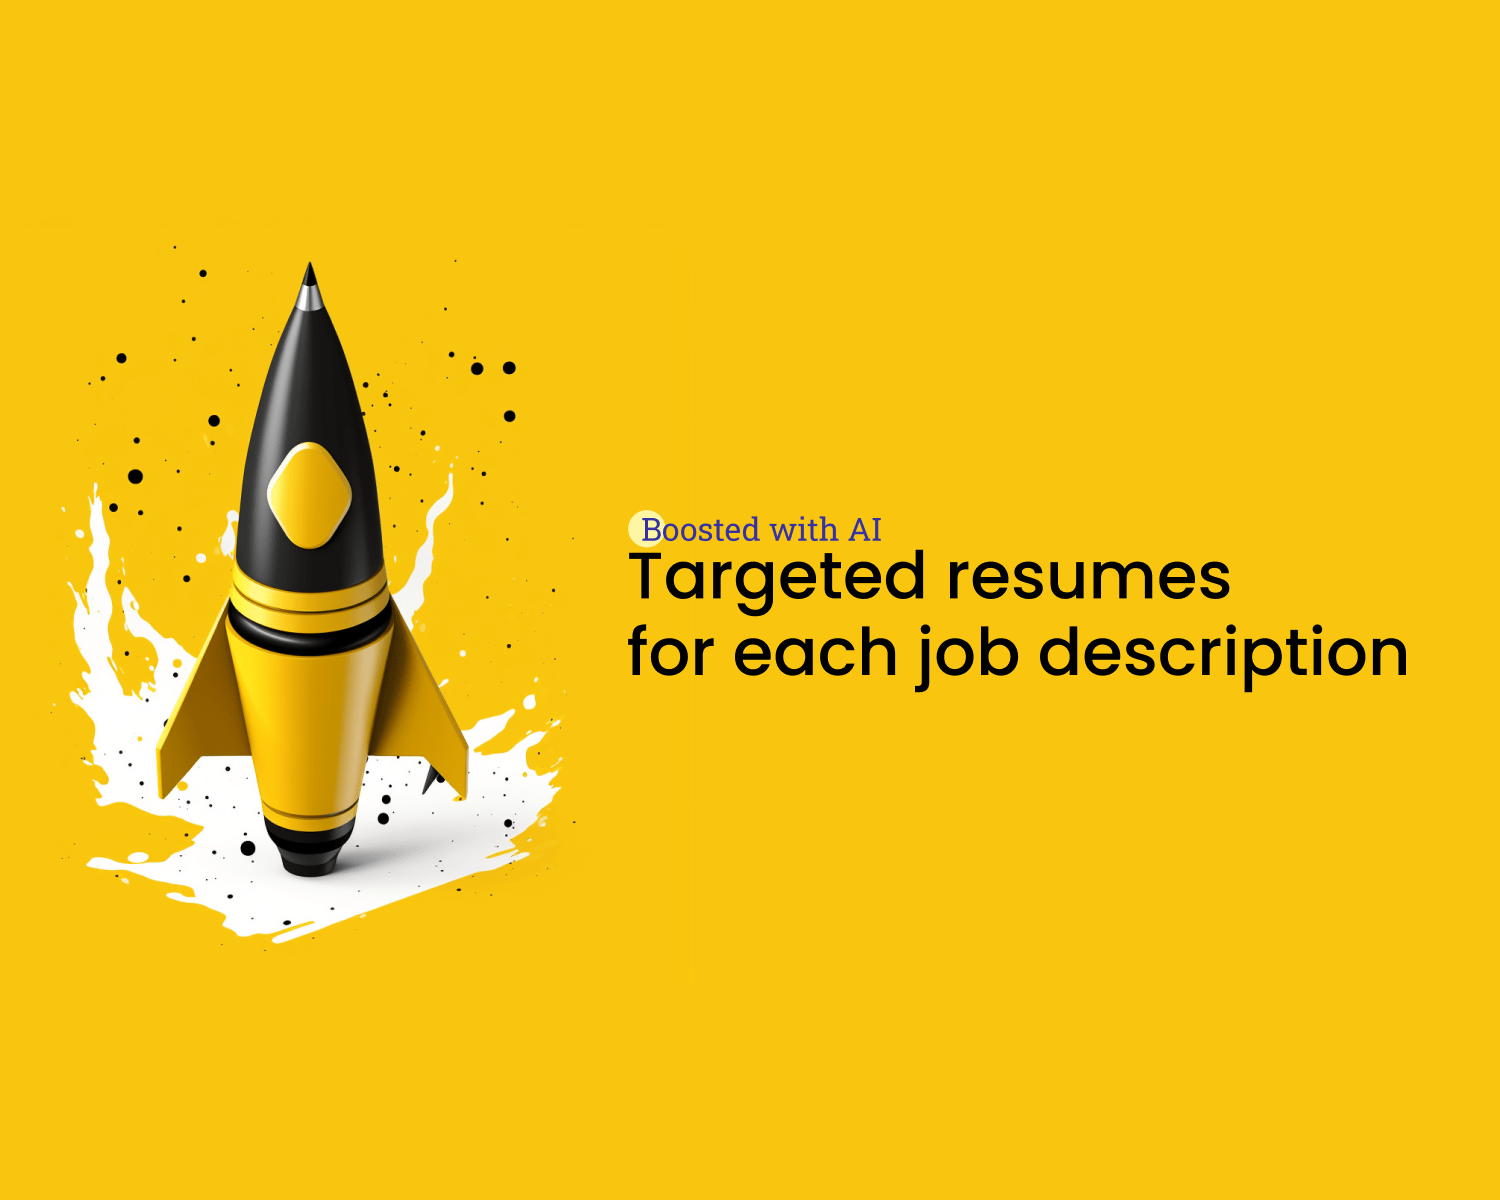 boosted resume image with 3d rocket